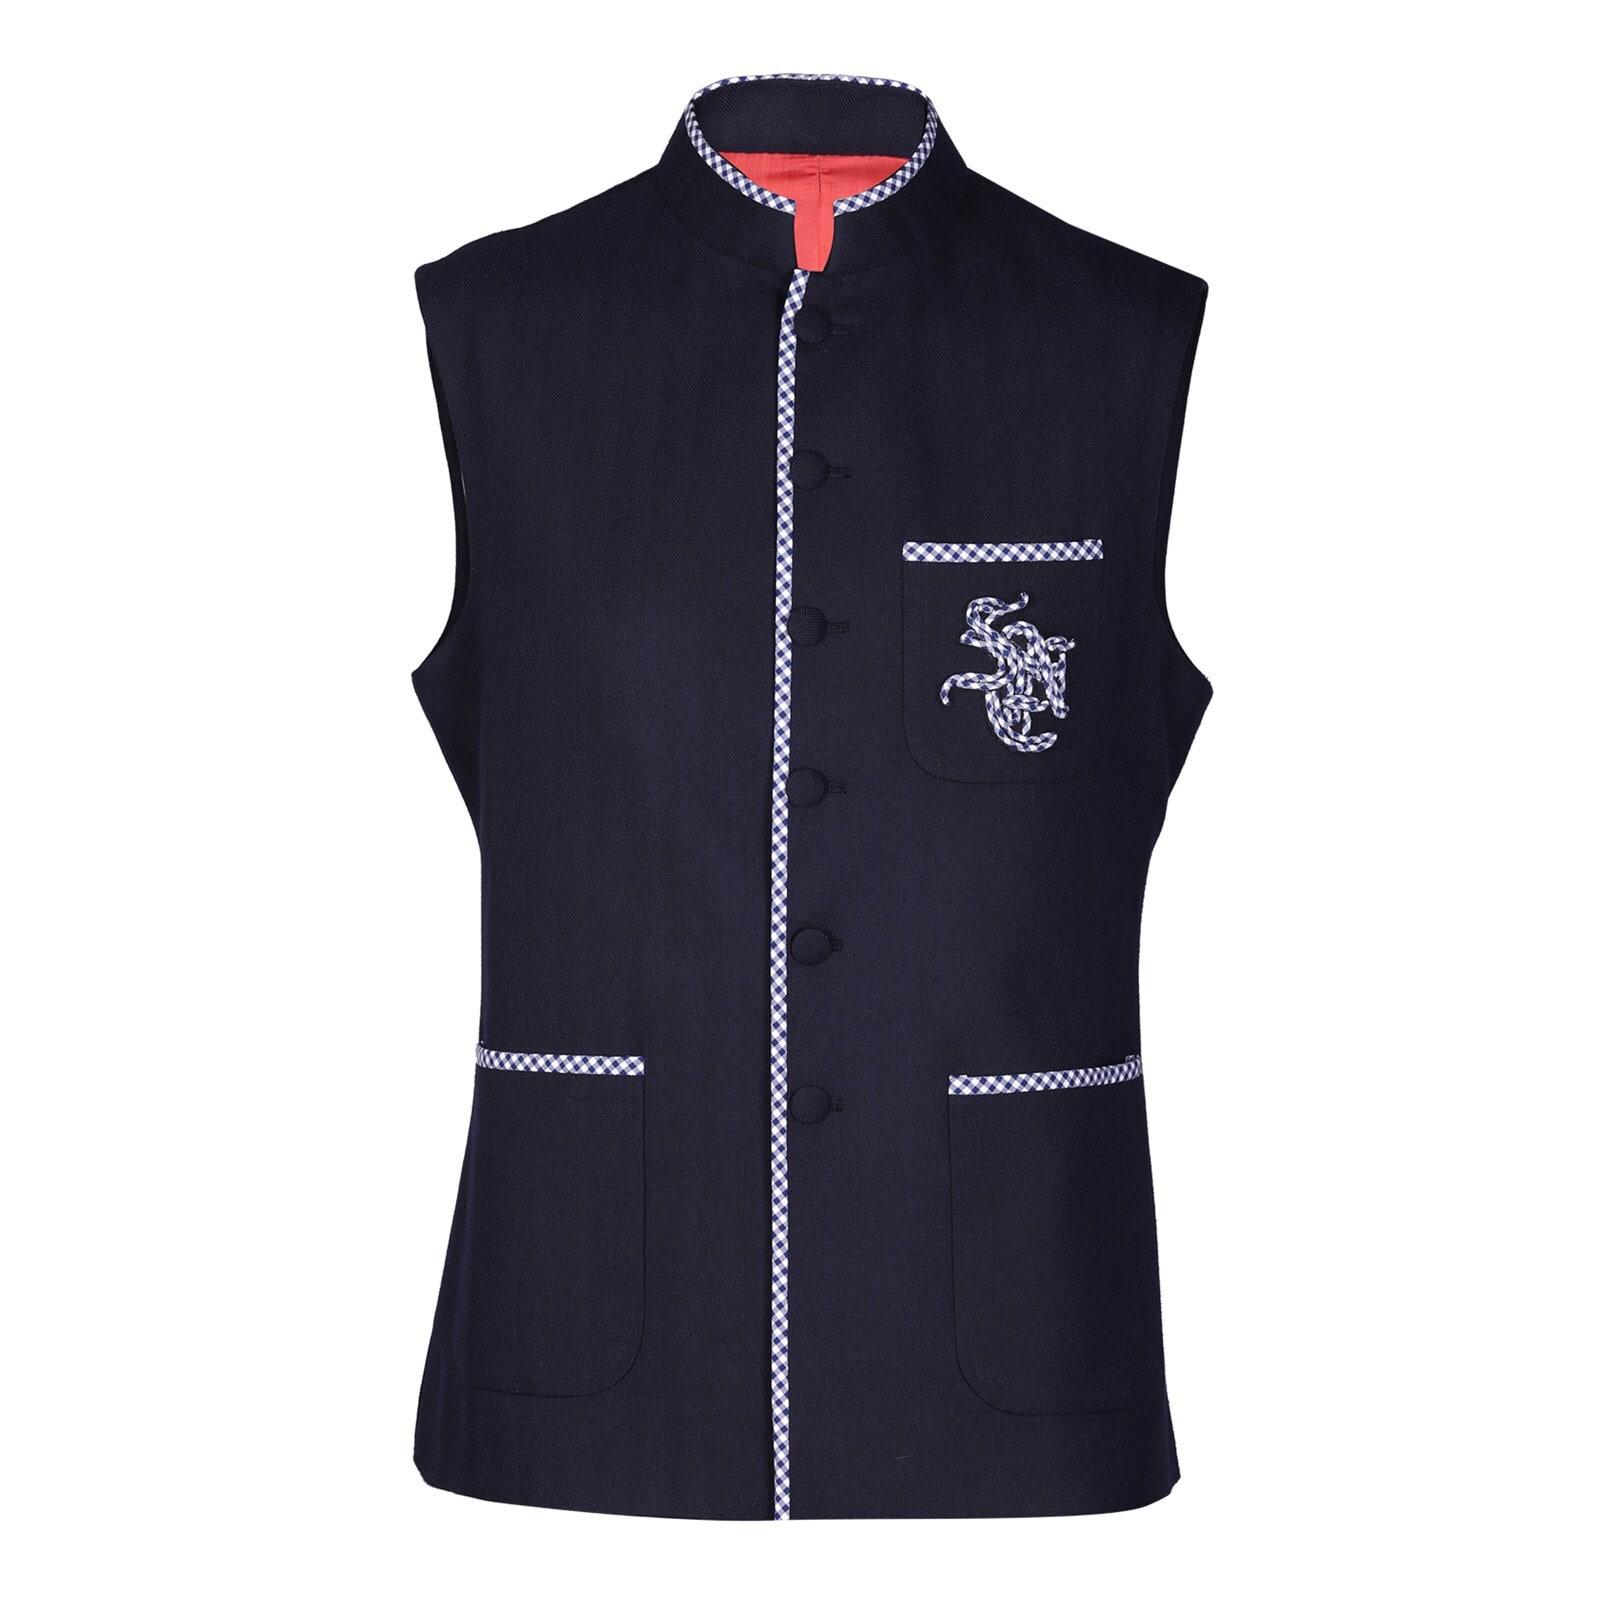 men navy sncc waistcoat with contrast piping